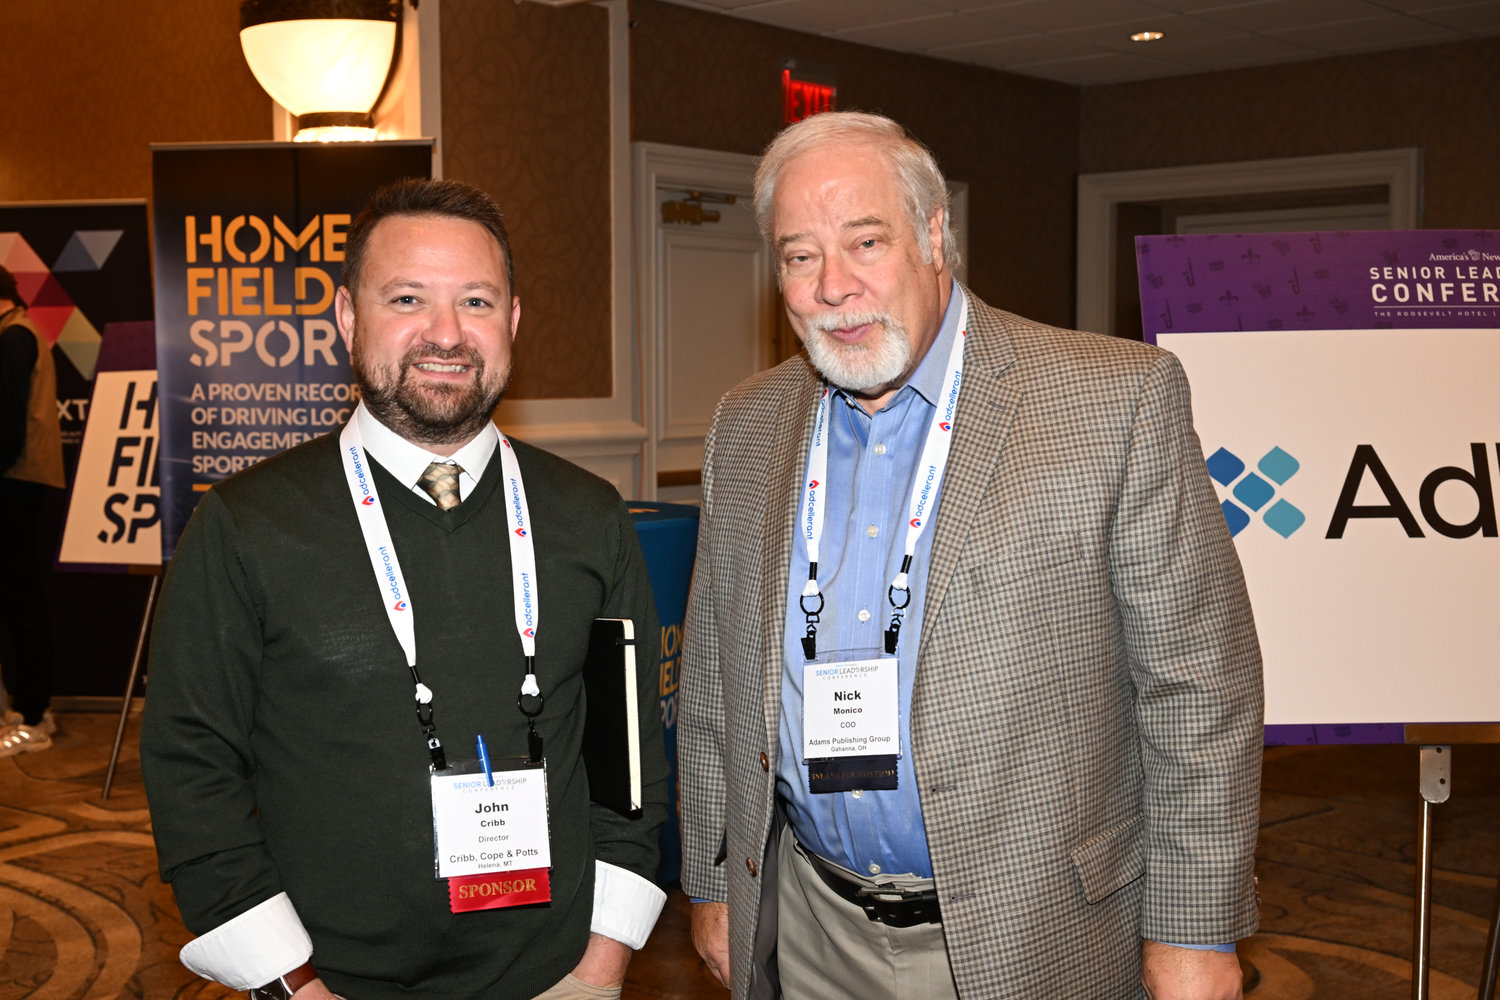 John Cribb, director, Cribb, Cope & Potts, and Nick Monico, COO of Adams Publishing Company. (Photo by Jeff Strout)